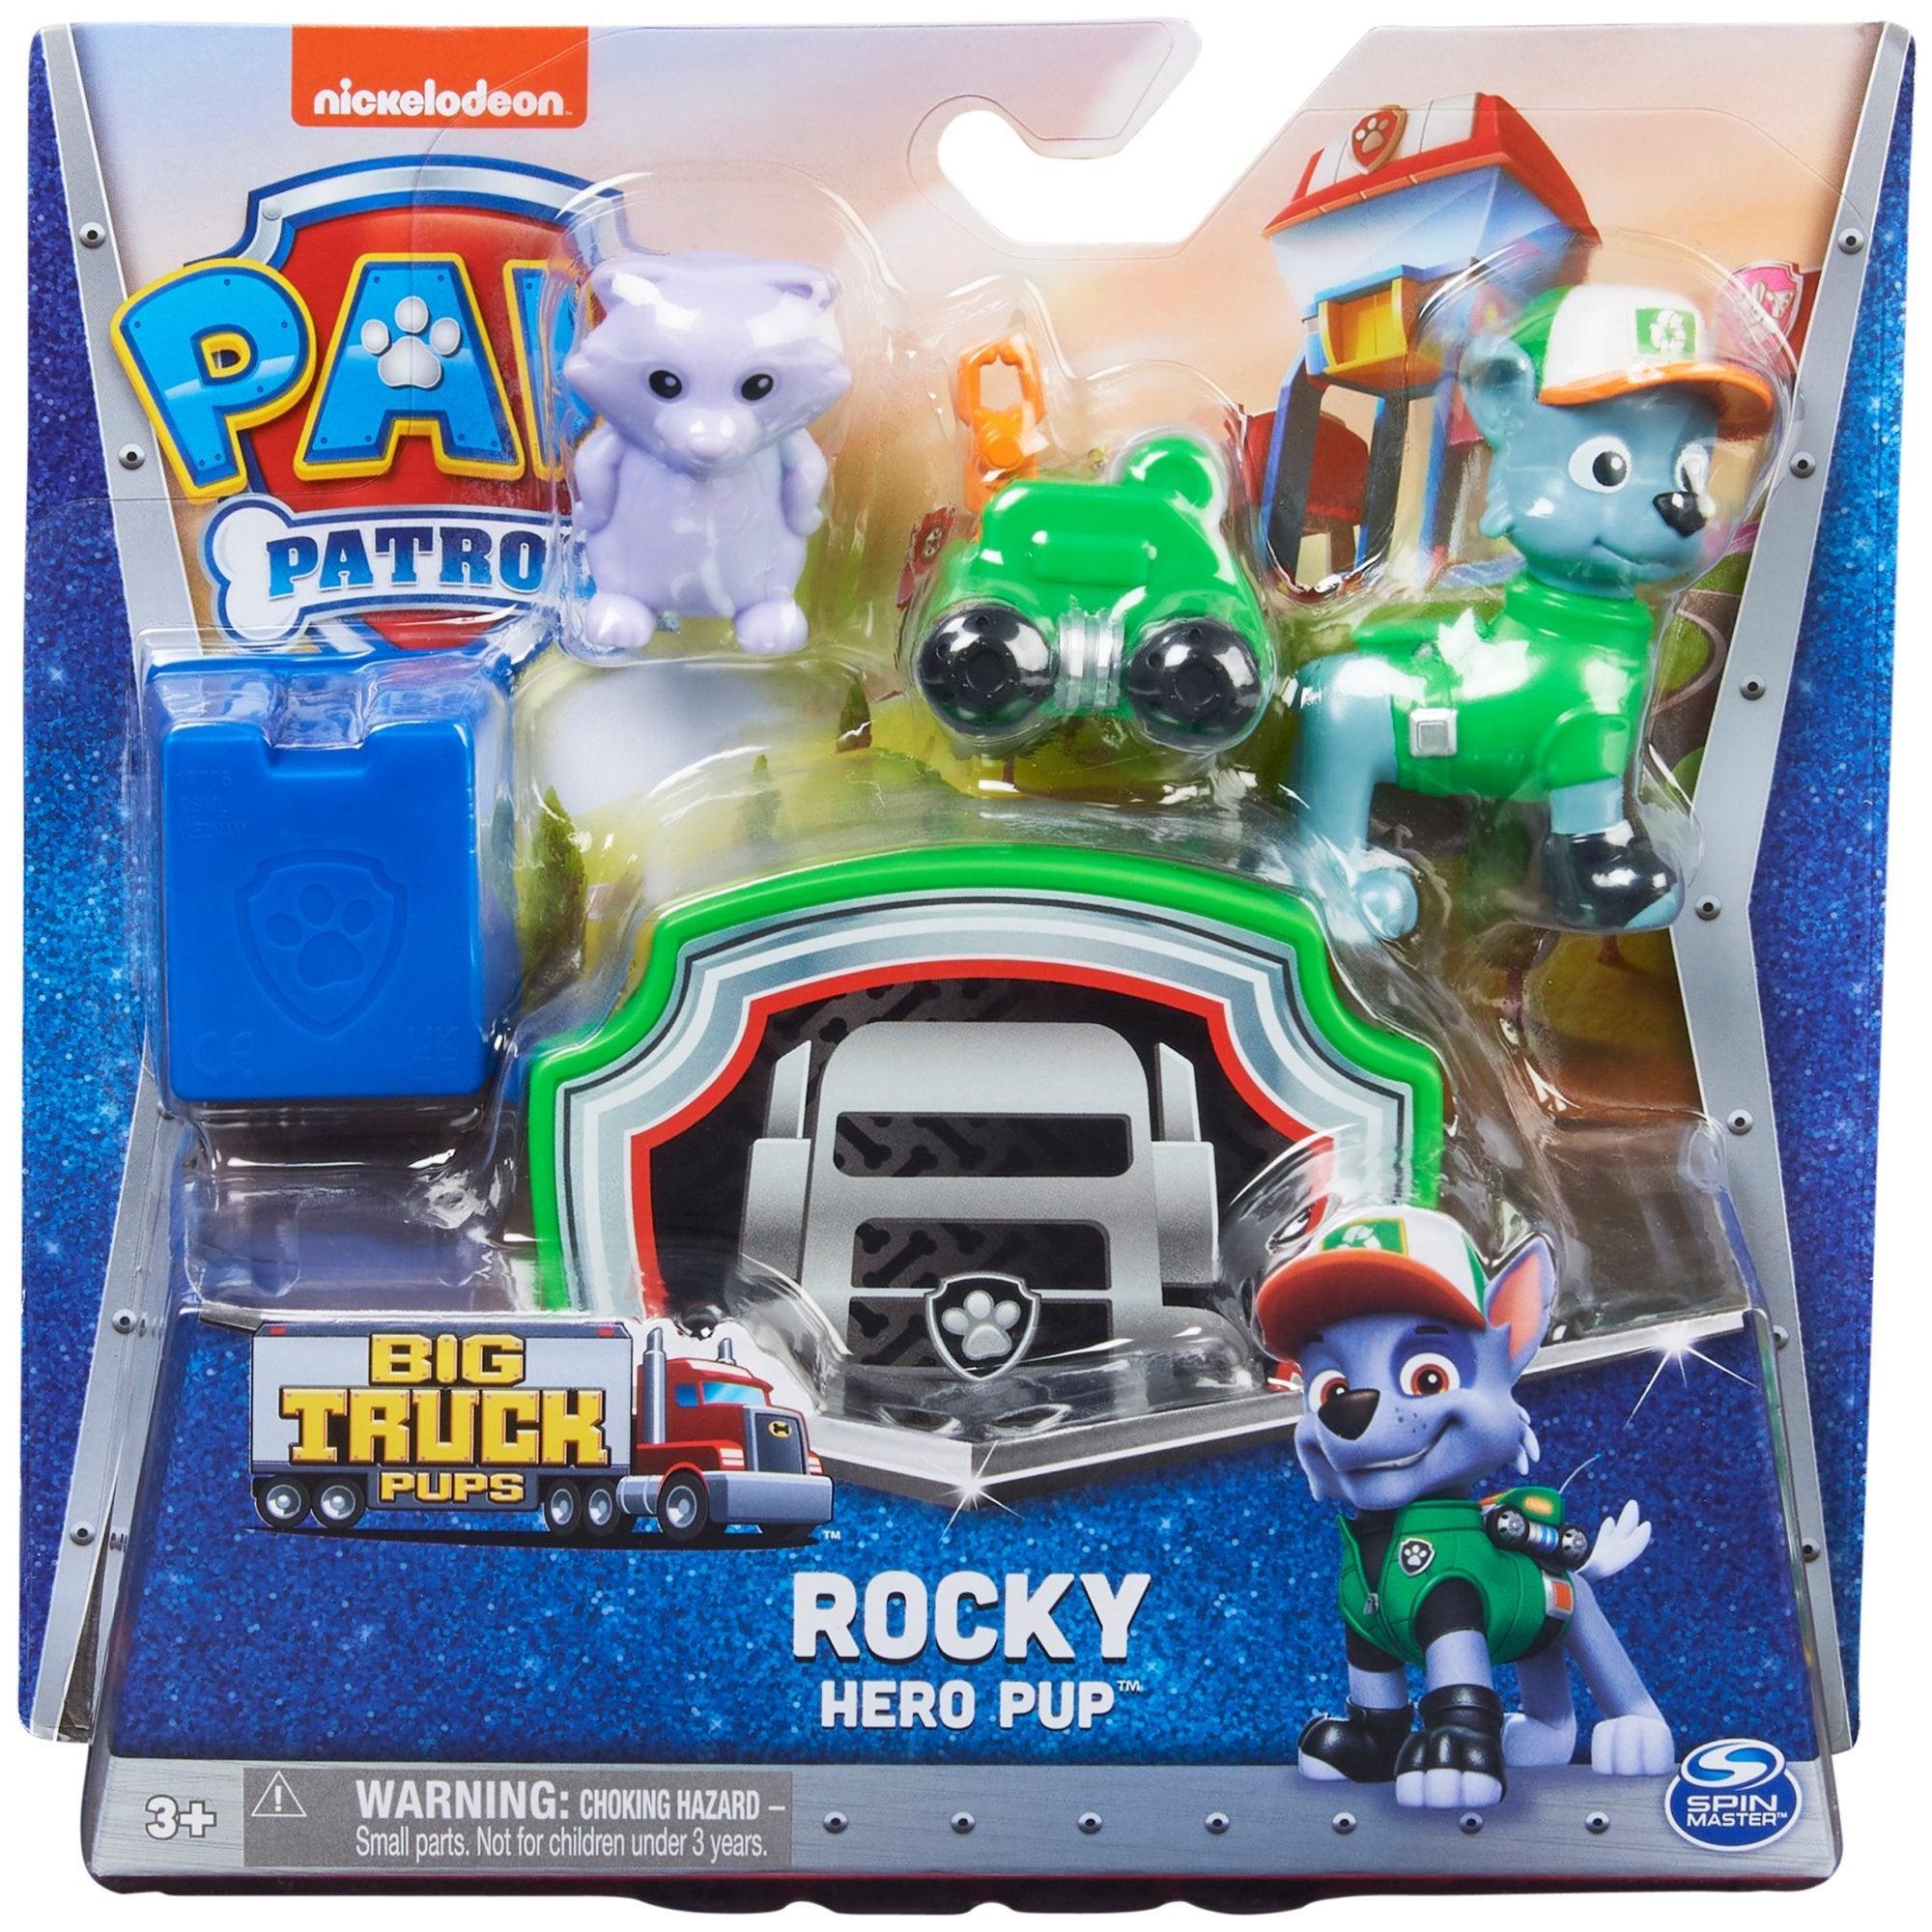 Spin Master Paw Patrol Big Truck Pups Rocky 2.5-inch Action Figure - BumbleToys - 5-7 Years, Arabic Triangle Trading, Boys, Figures, Paw Patrol